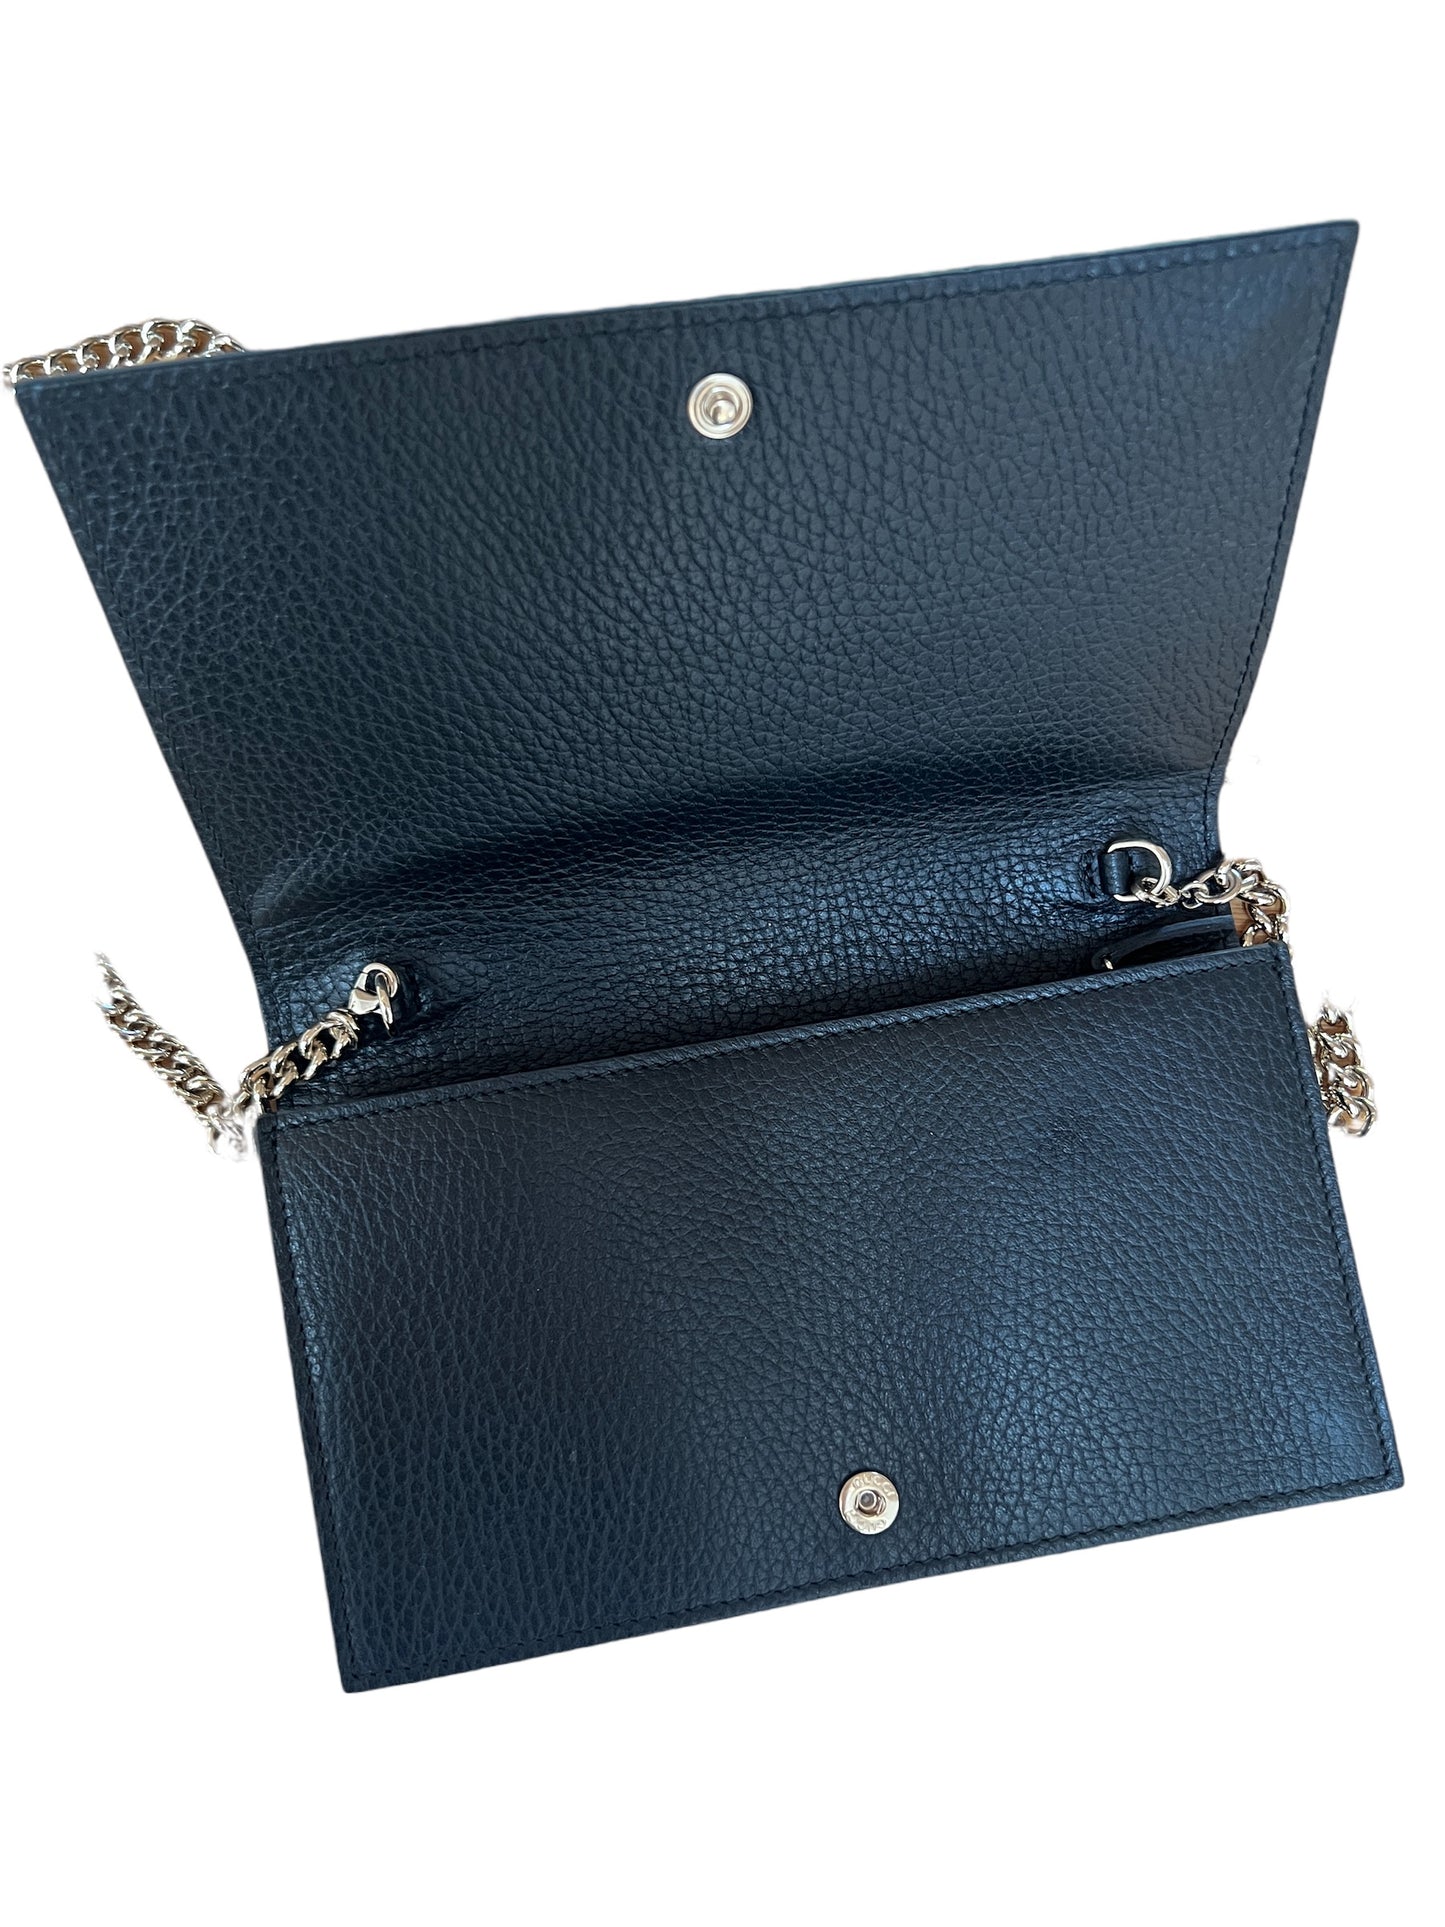 Black Leather Wallet on Chain